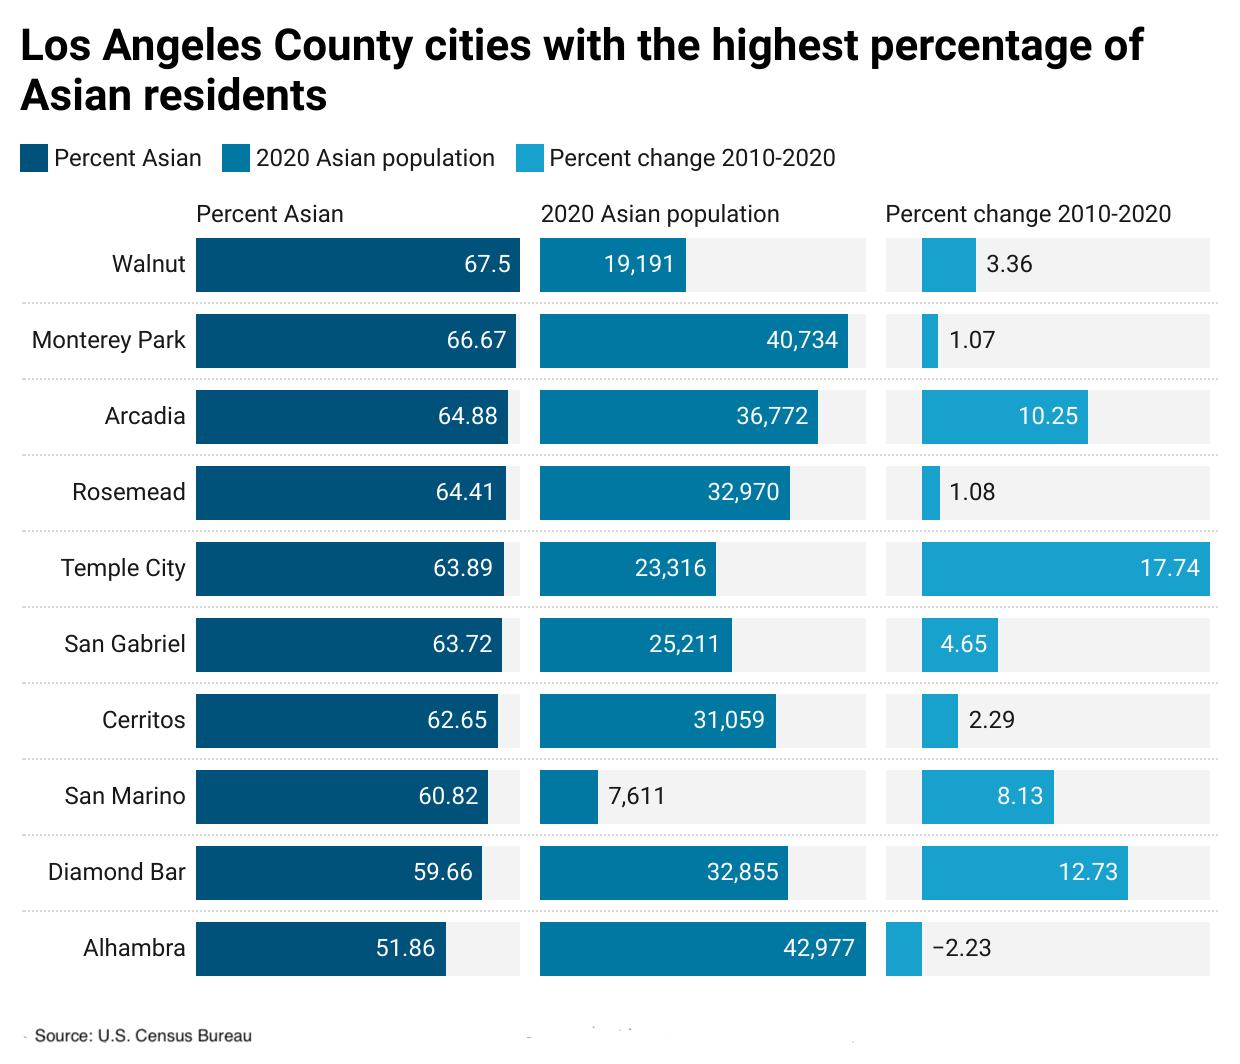 Los Angeles County Cities with biggest percentage of Asian residents